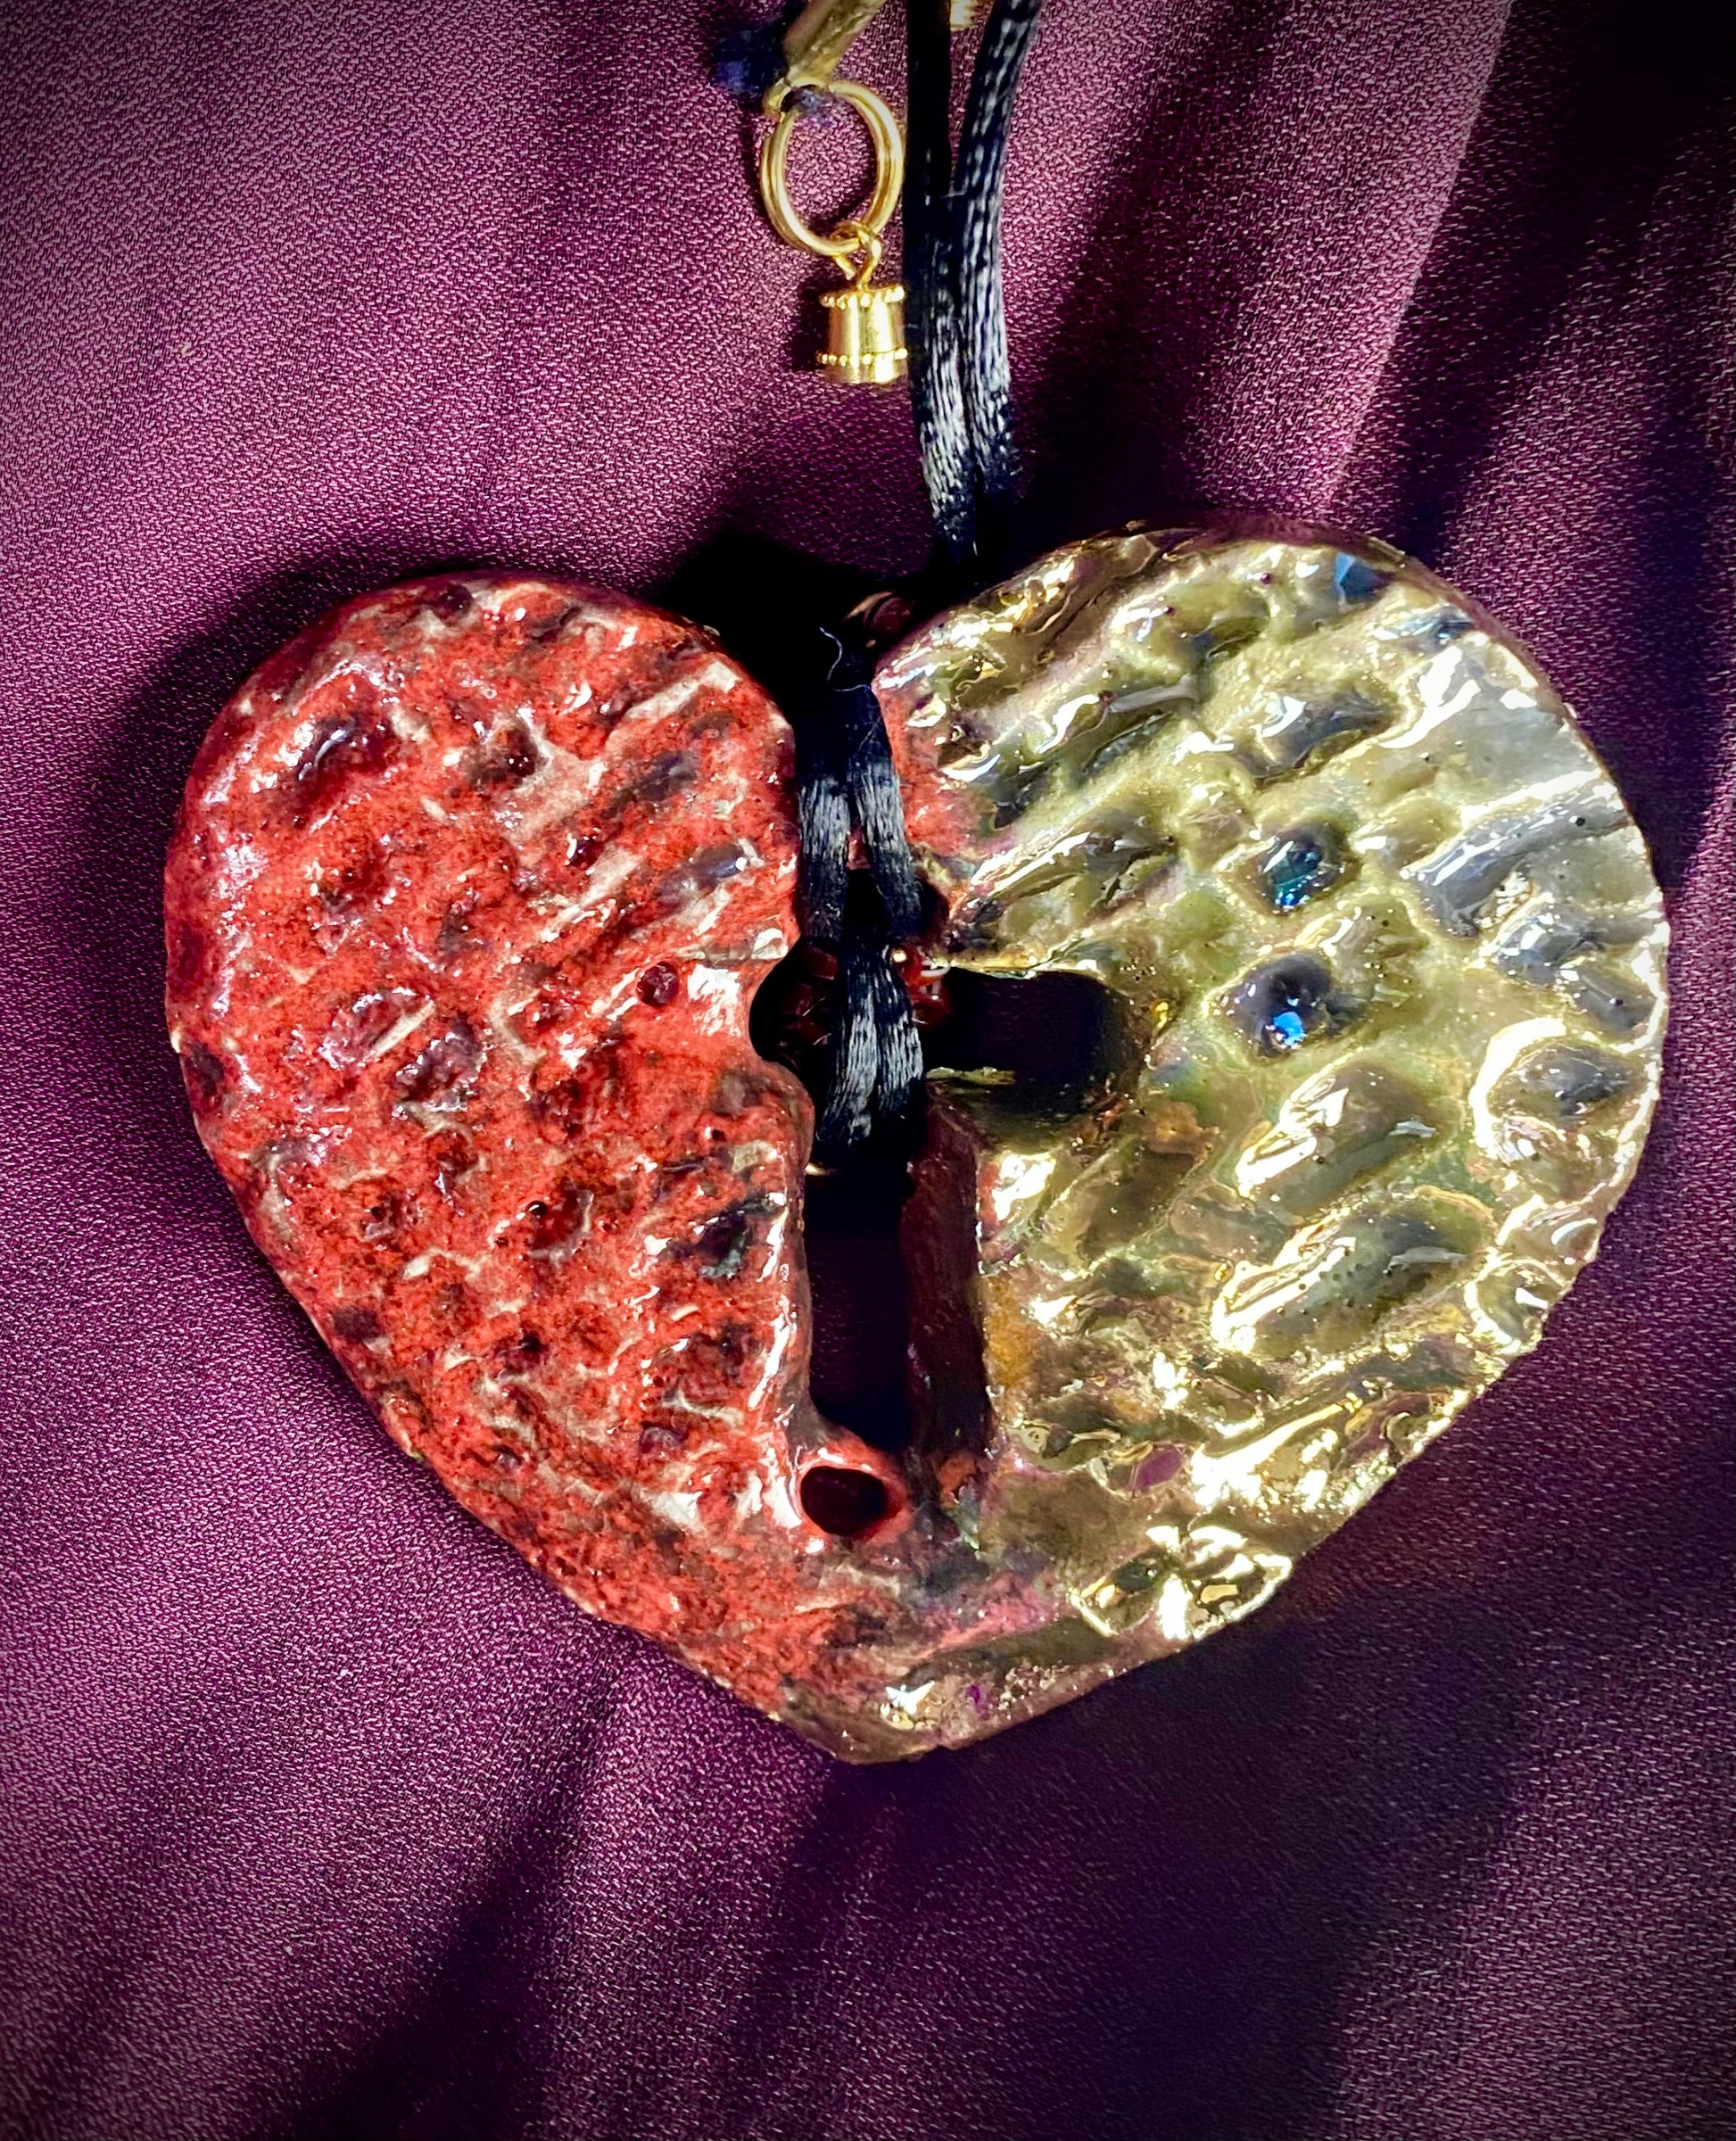 Have A Heart ! Each heart pendant is handmade with love! It is 3"x 3" and weighs approx. 3ozs. This pendant has a  ruby red and gold metallic raku glazes that renders a unique translucent  patina. The heart  has a textured  pattern with a cut out cross in the center.. It holds a spiral of ruby red mini beads on a spiral copper wire. This pendant has a nice 12" black suede cord!